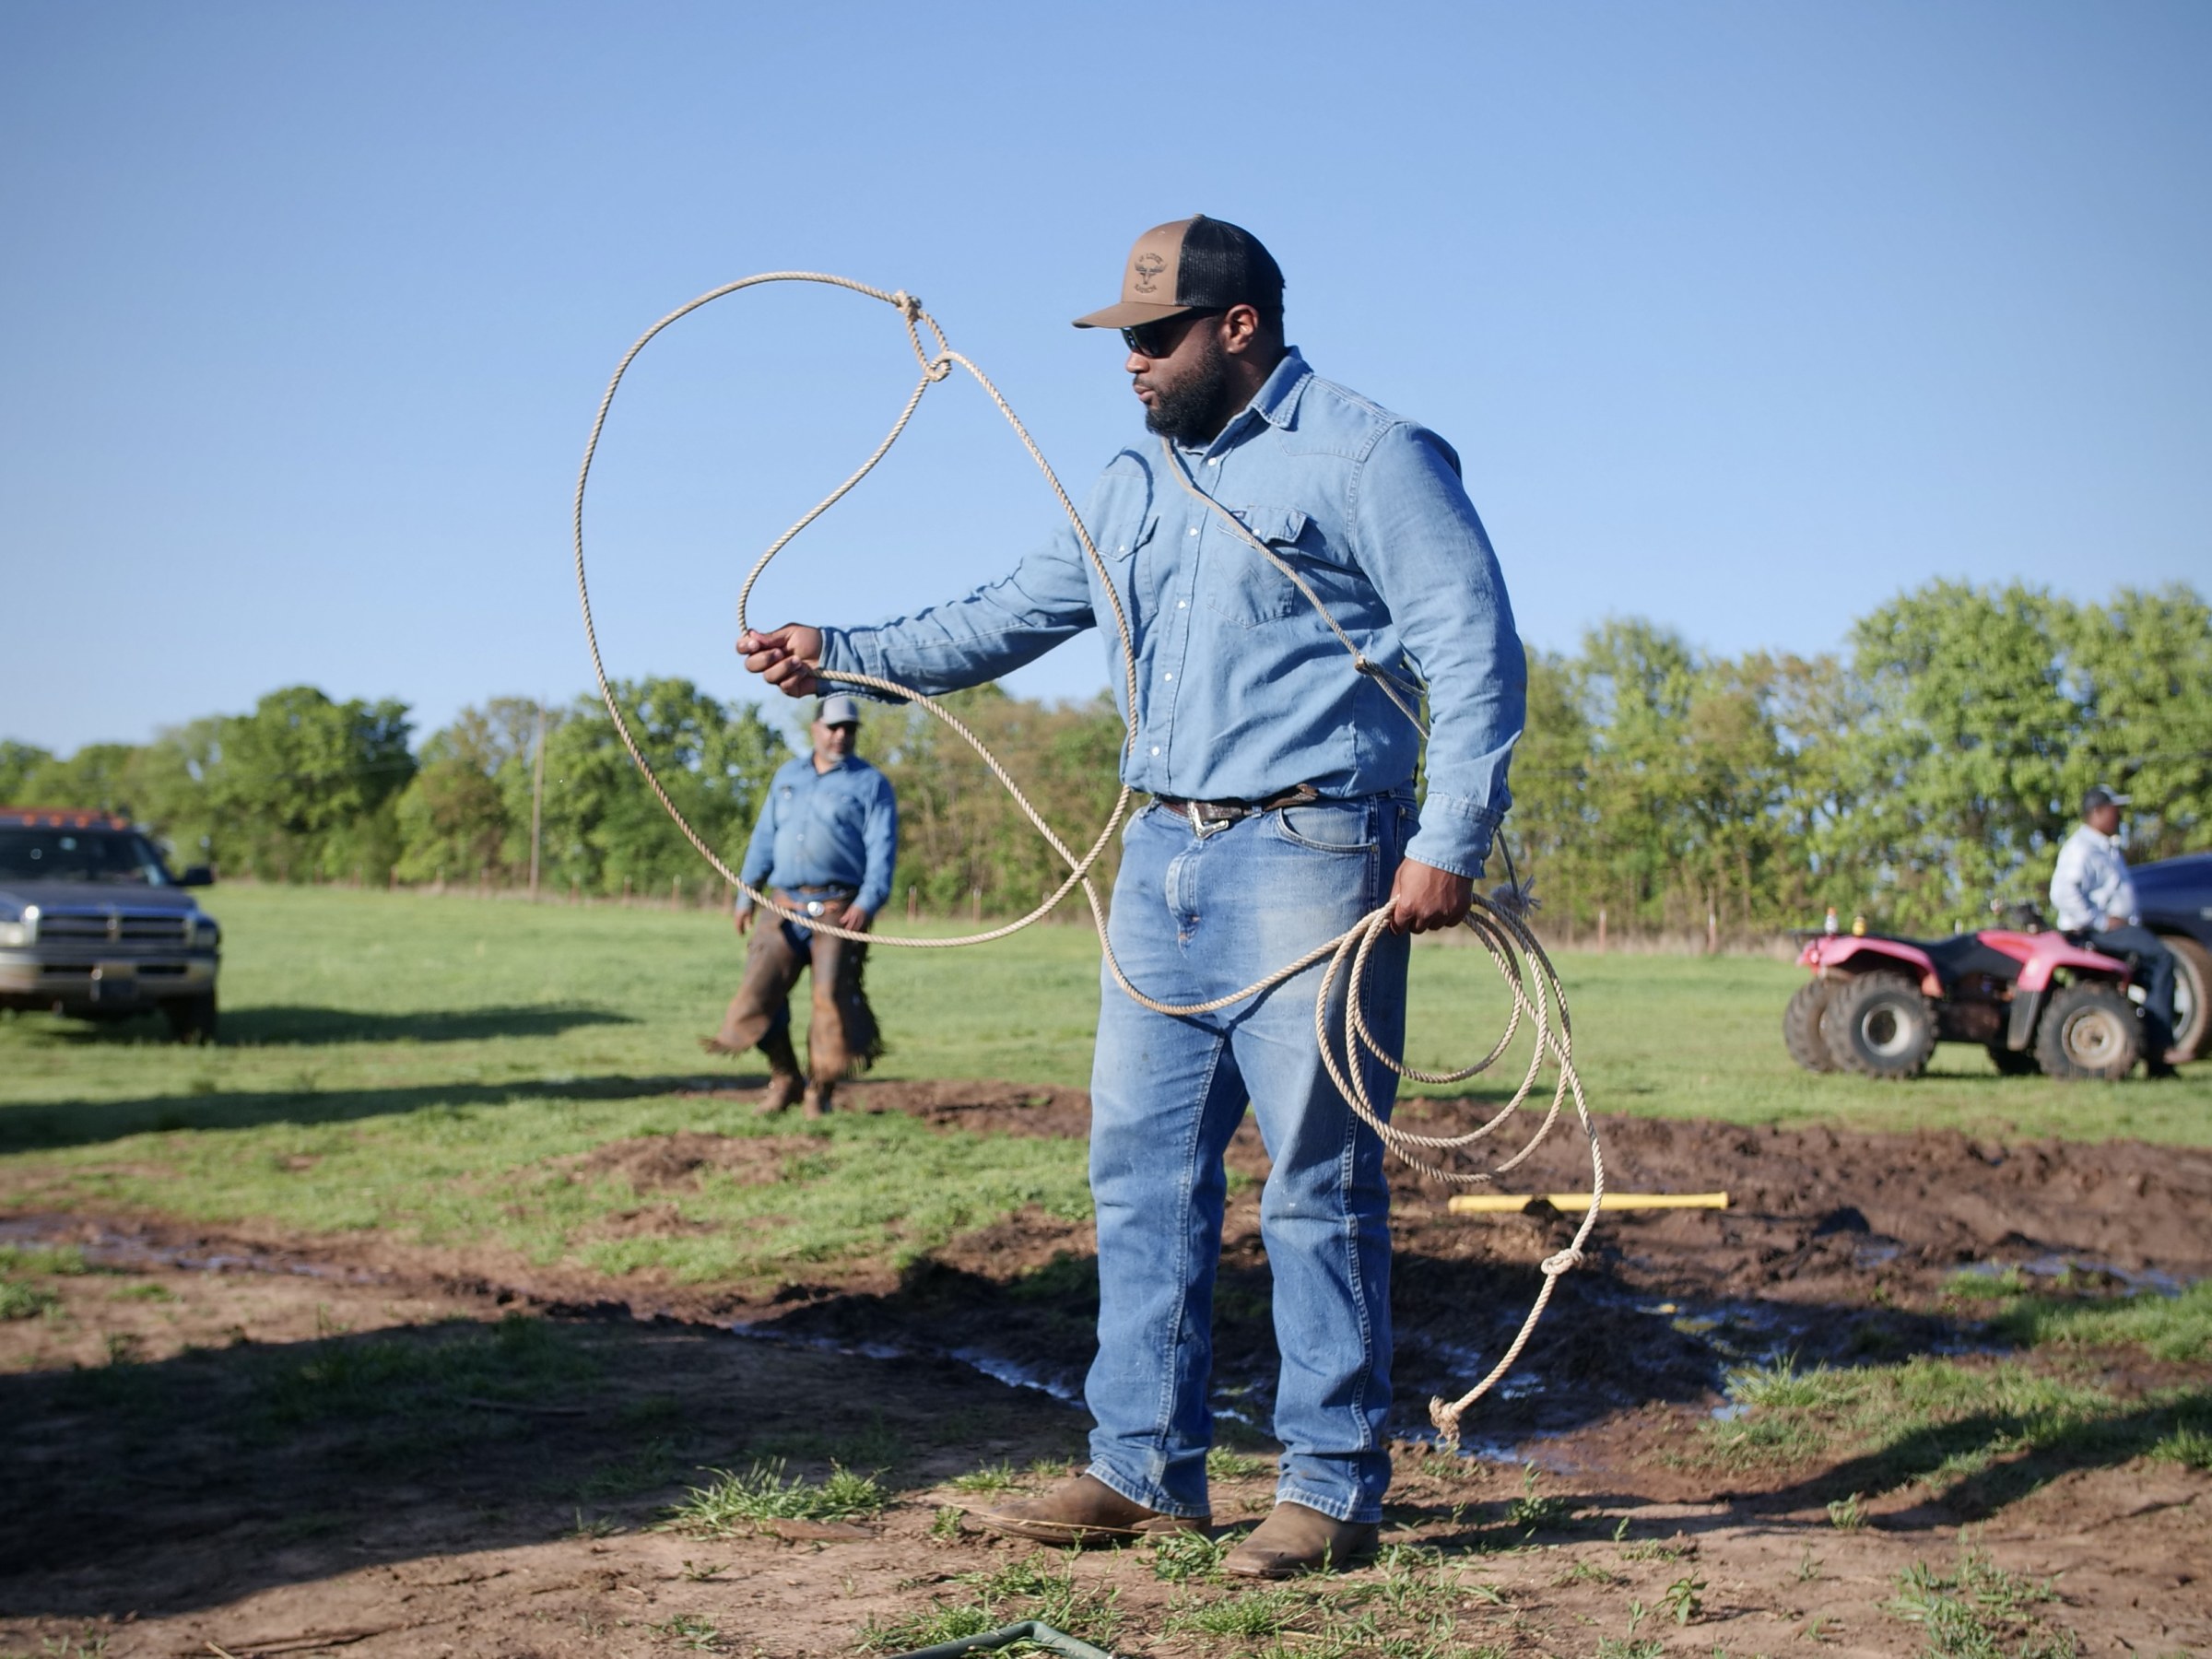 A man in denim pants and shirt twirls a lasso in the foreground, while a man rides a four-wheeler and another man walks in the background on a farm setting.